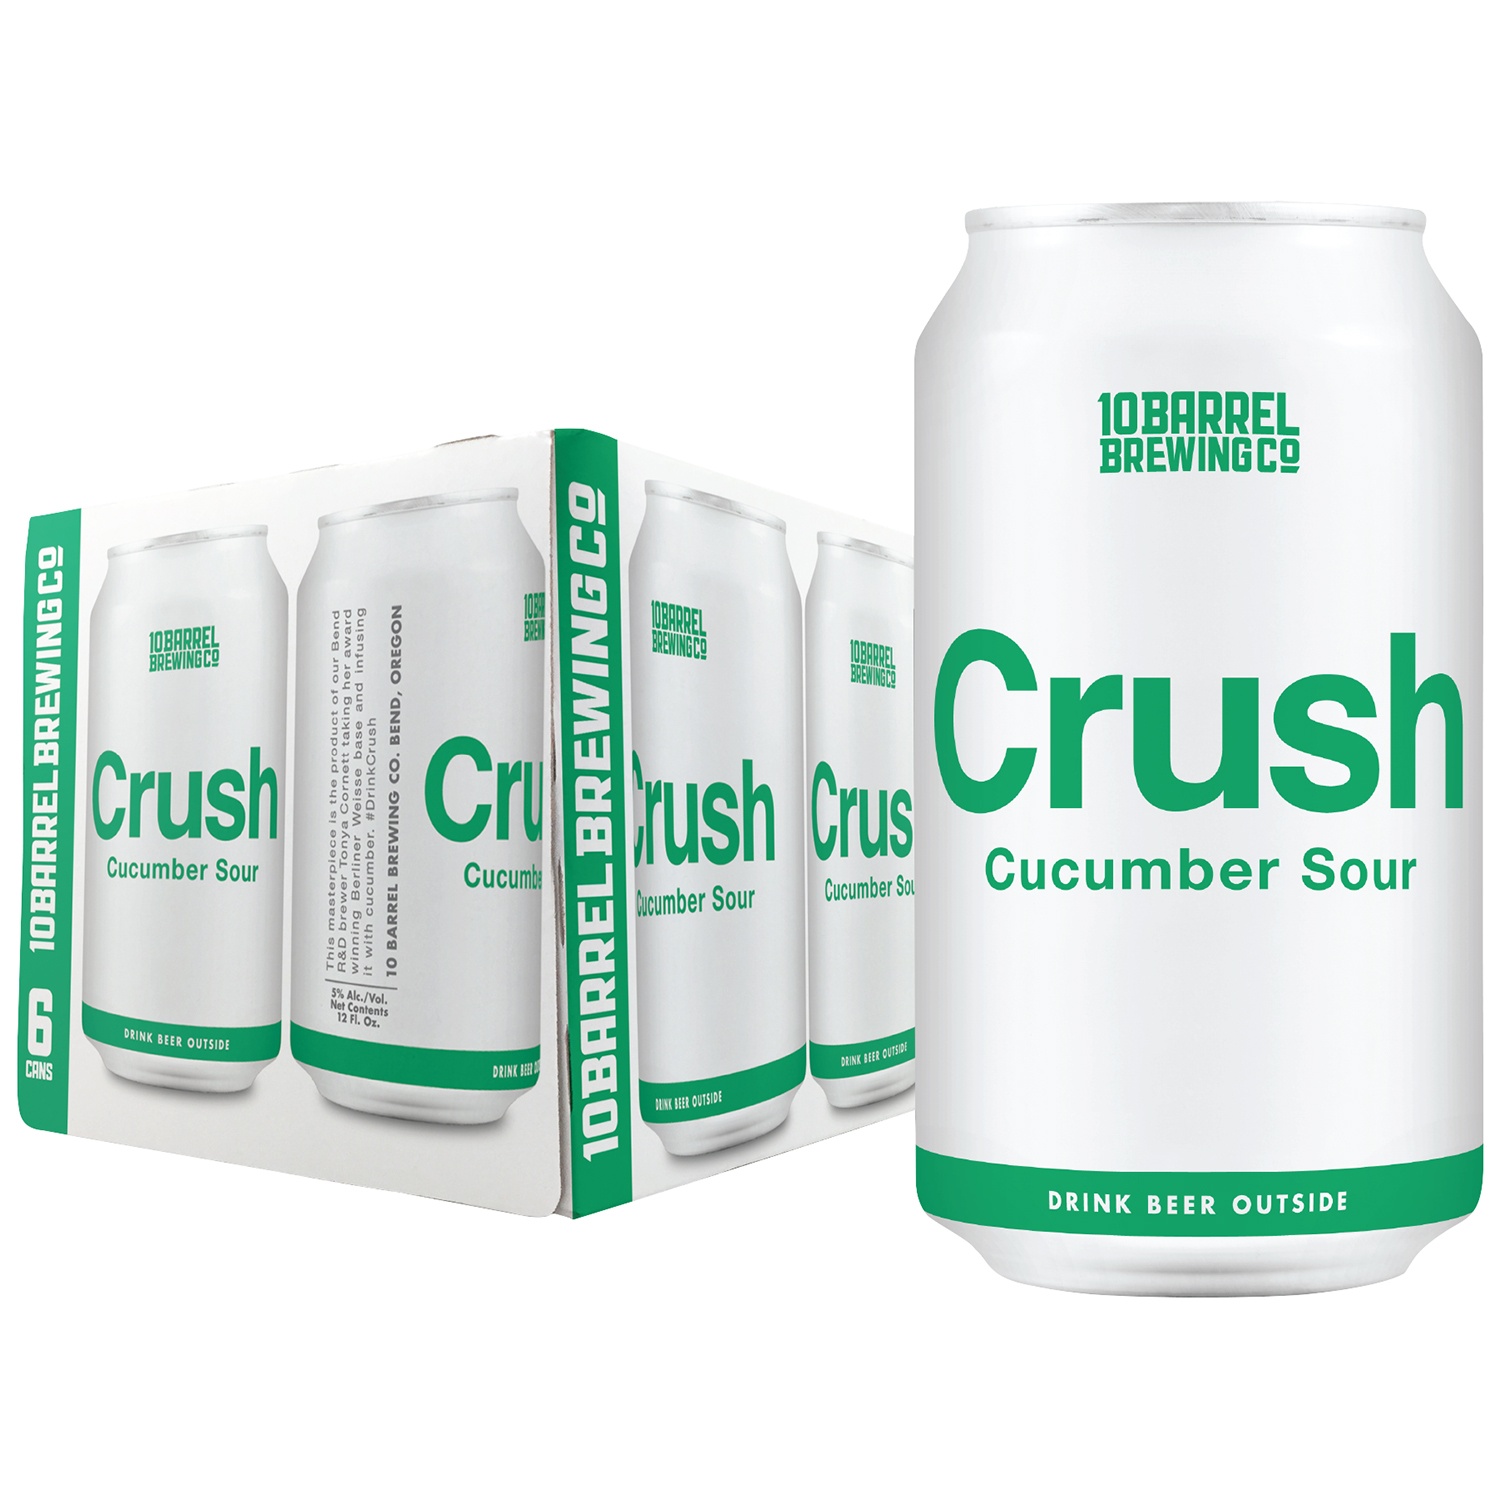 slide 1 of 1, 10 Barrel Brewing Co. Crush Cucumber Sour Ale, 5% ABV, 6 ct; 12 oz